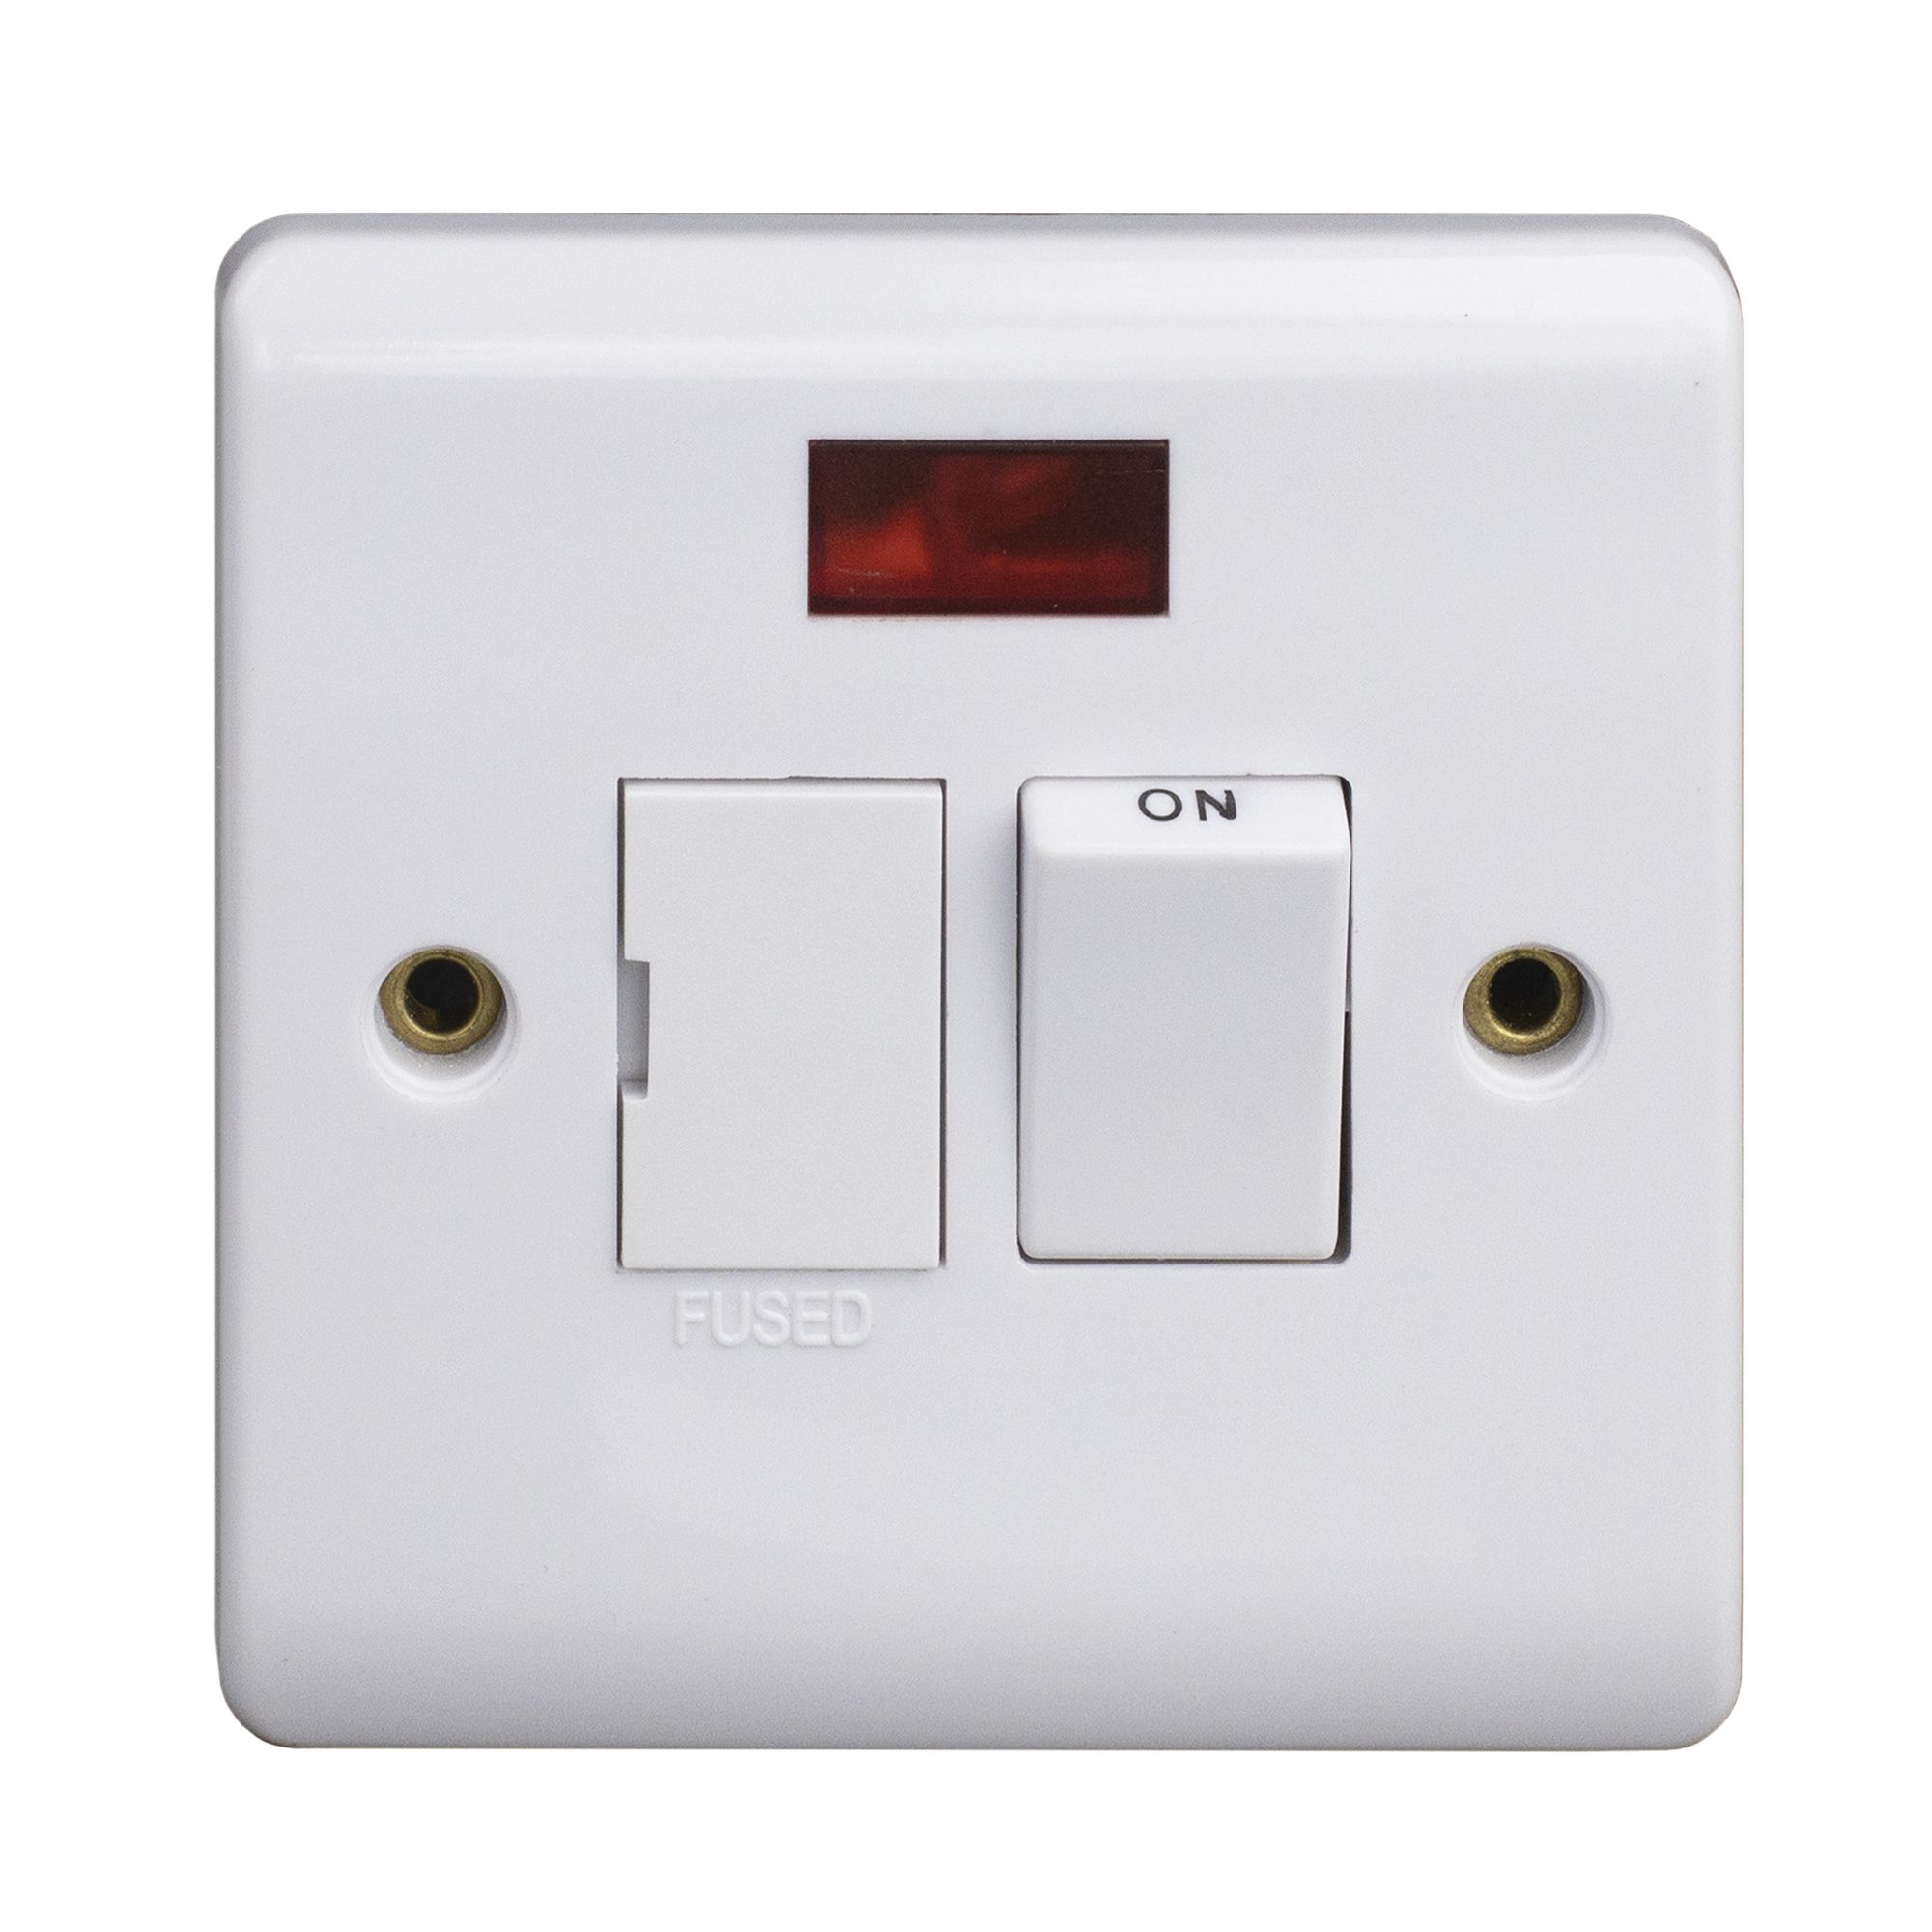 LAP White 13A 2 way Raised slim profile Screwed Switched Neon indicator Fused connection unit